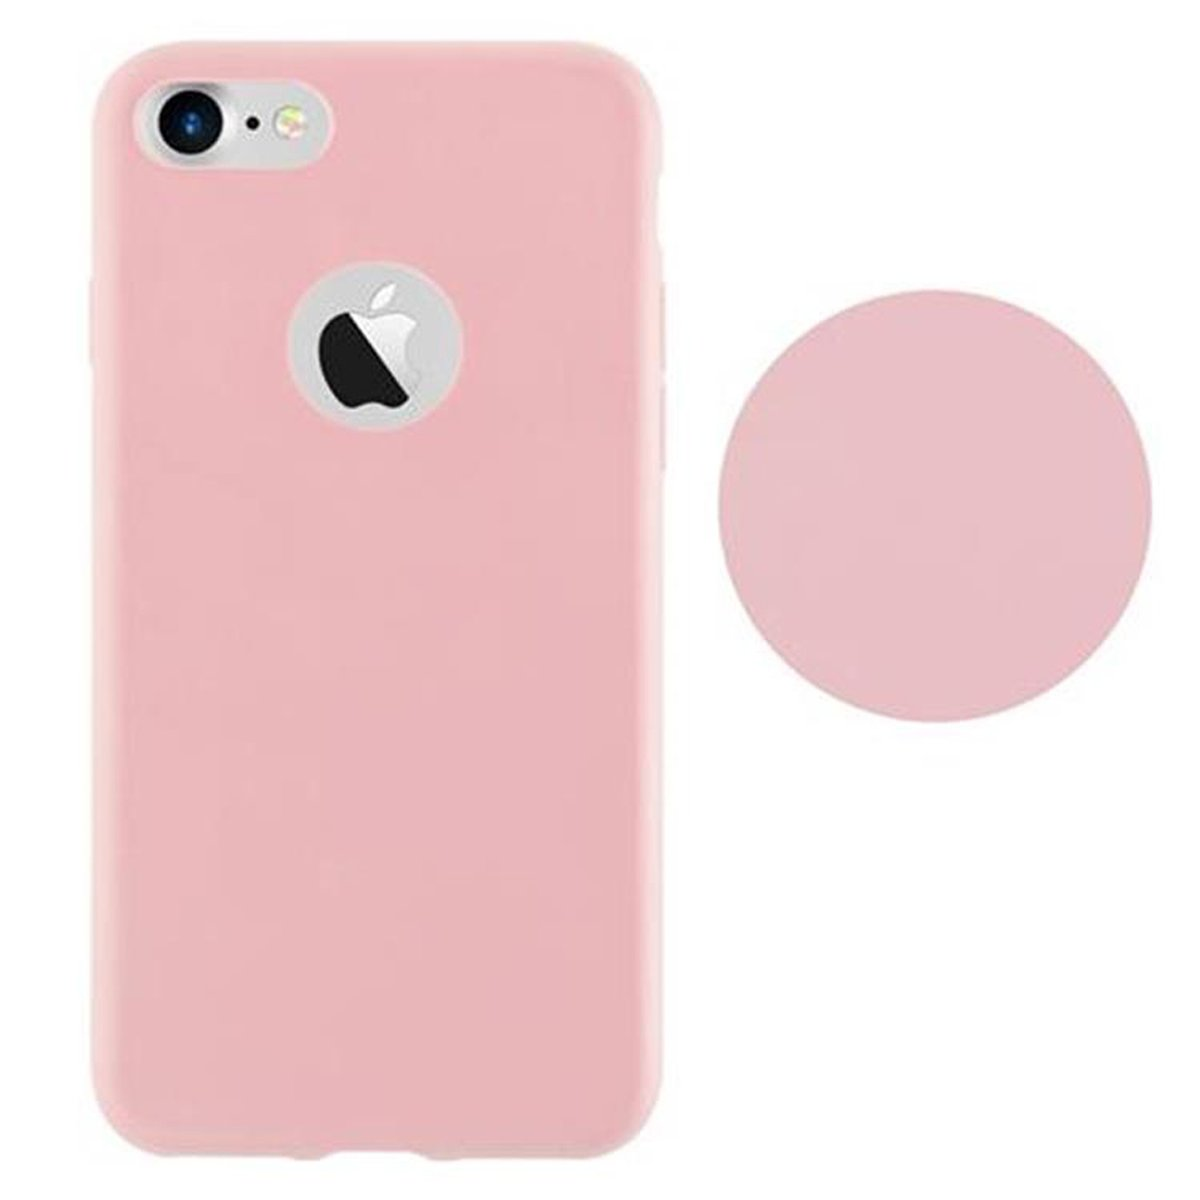 Backcover, Candy / / im 7 CANDY ROSA CADORABO SE Hülle iPhone Apple, 2020, 7S Style, 8 / TPU